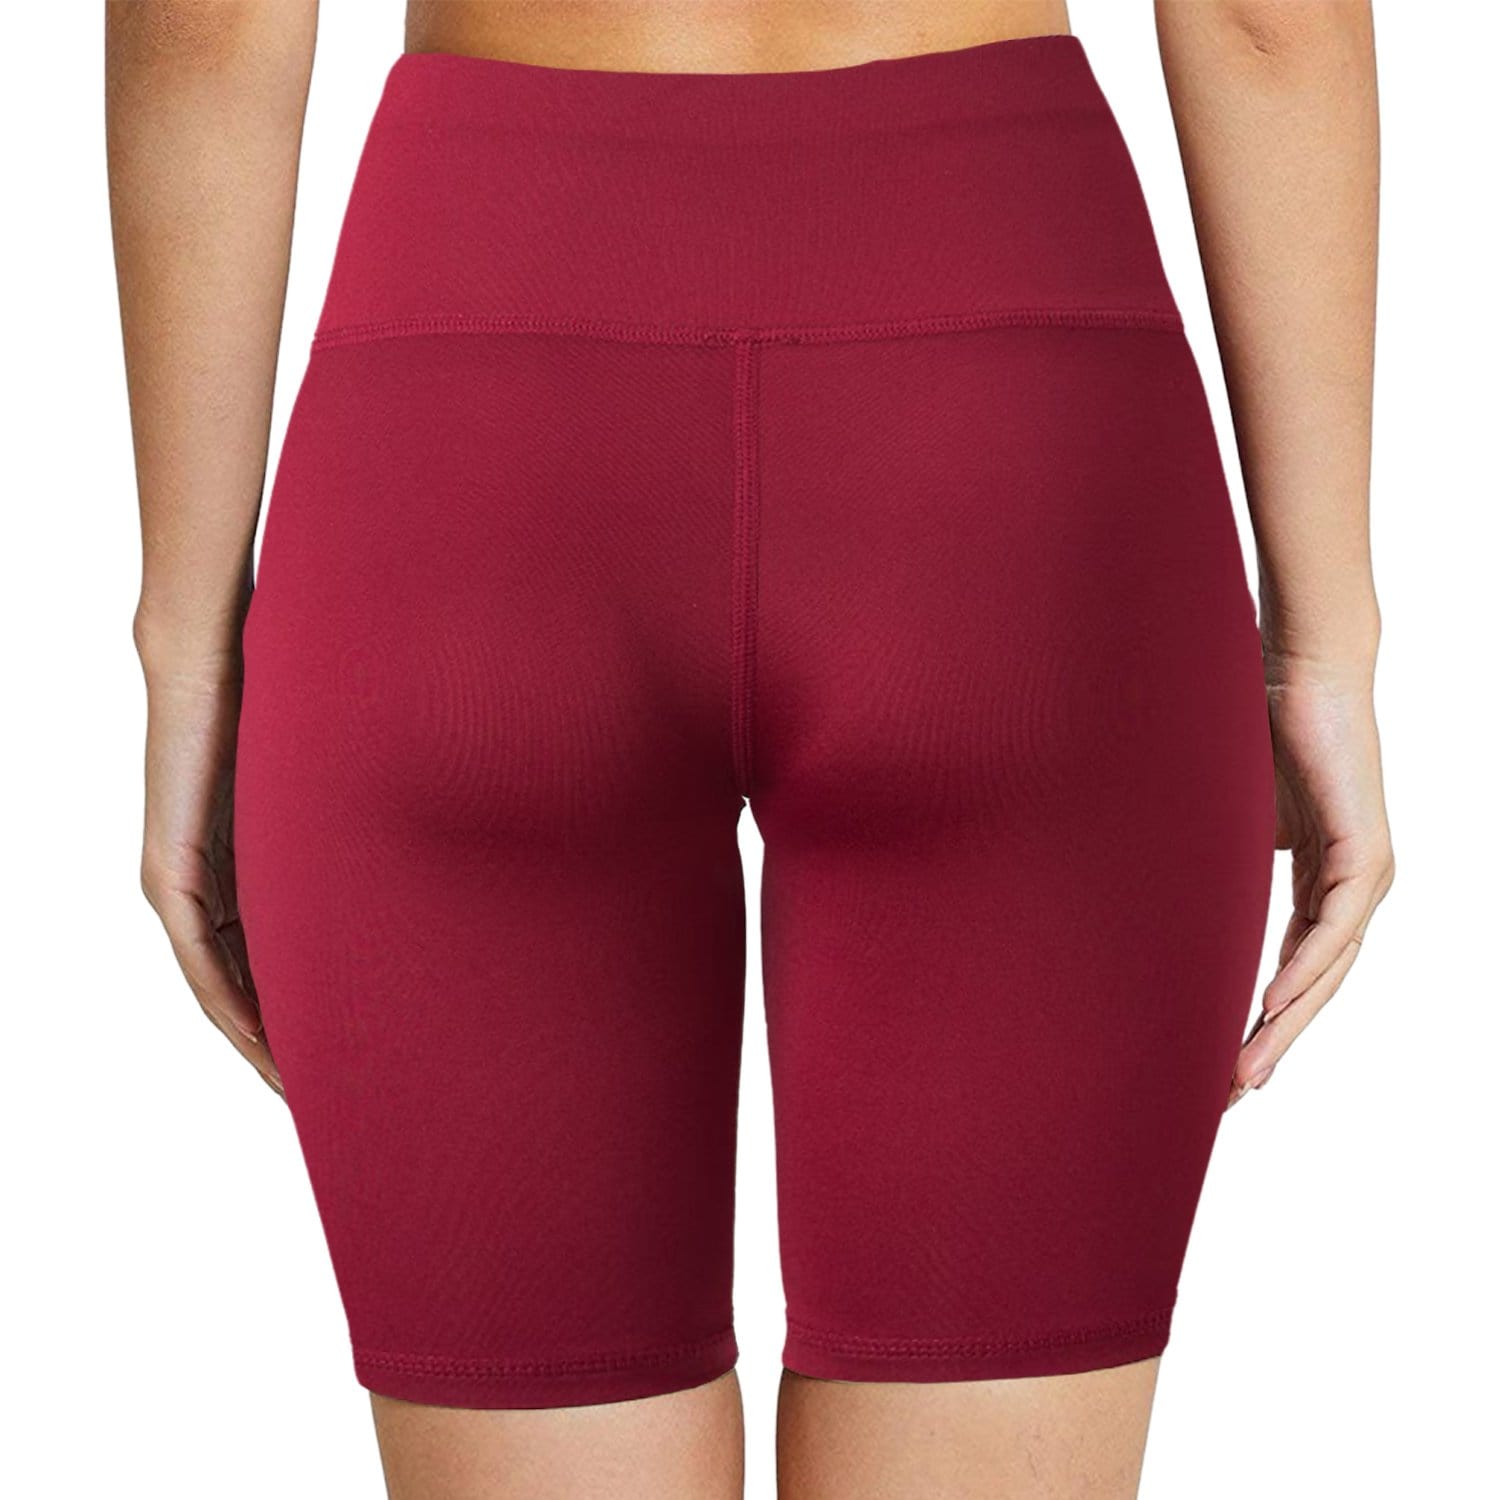 MorningSave: 2-Pack: Extreme Fit Women's High Waist Performance Yoga Shorts